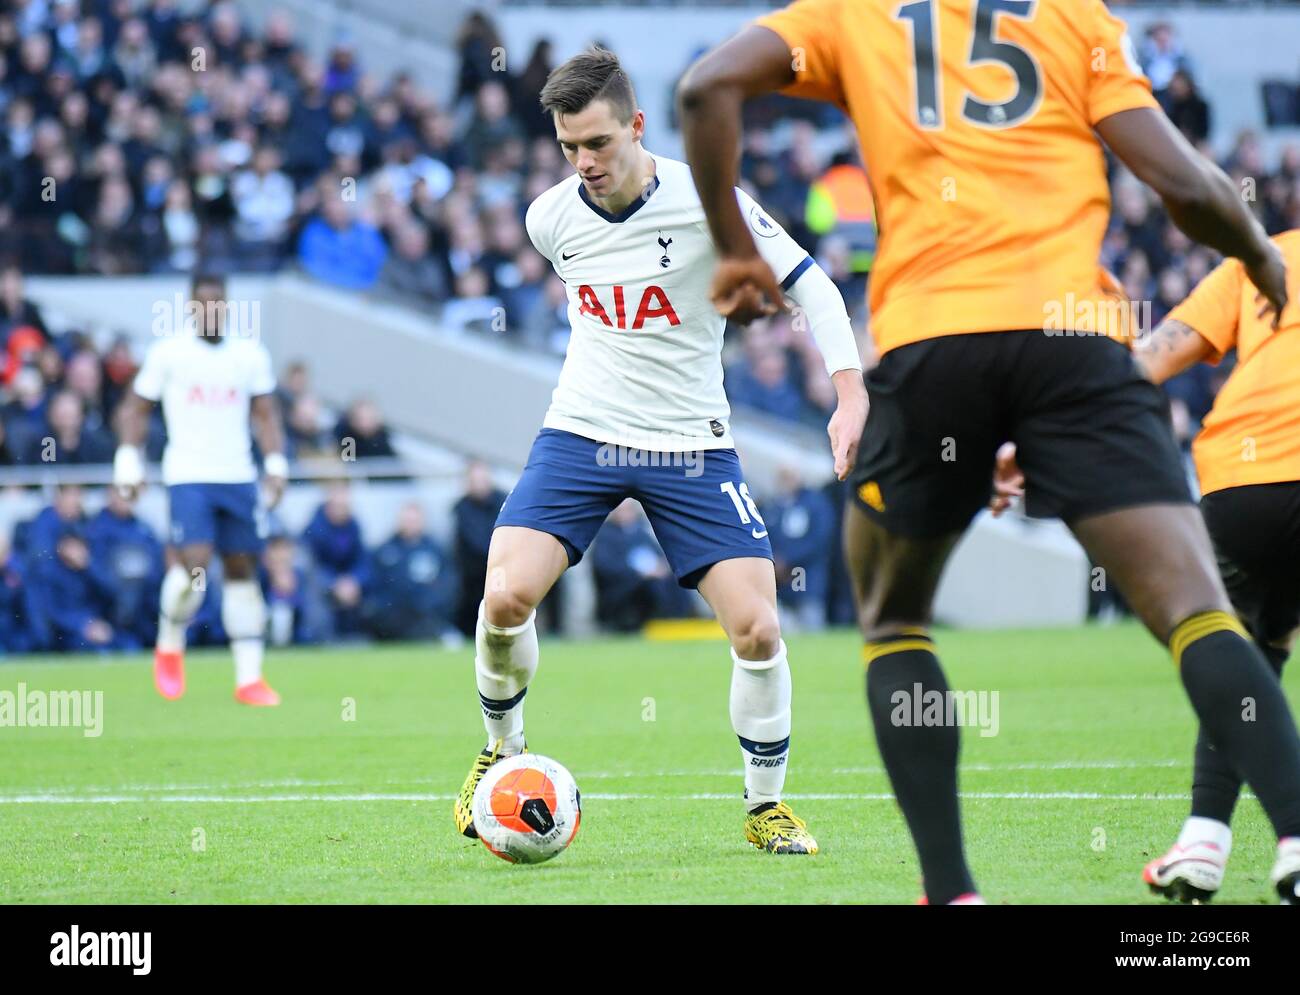 LONDON, ENGLAND - MArch 1, 2020: Giovani Lo Celso of Tottenham pictured during the 2020/21 Premier League game between Tottenham Hotspur FC and Wolverhampton FC at Tottenham Hotspur Stadium. Stock Photo